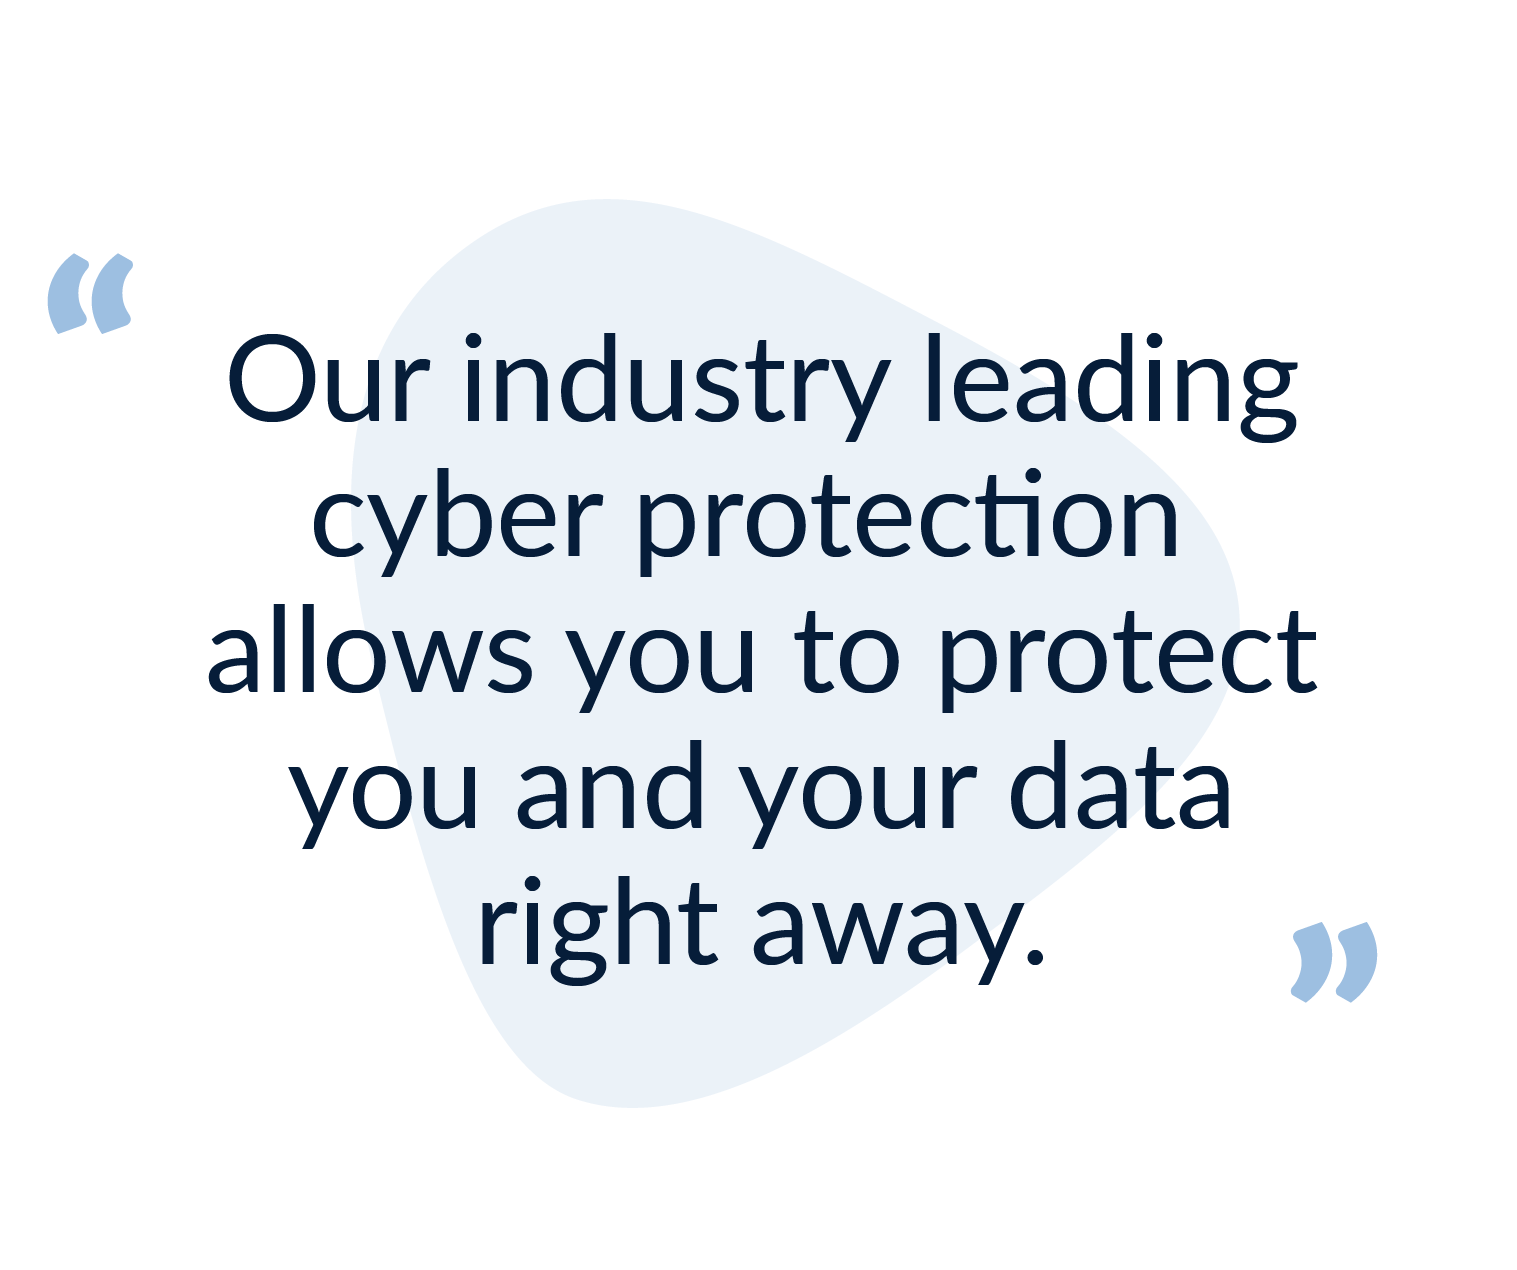 Call out: Our industry leading cyber protection allows you to protect you and your data right away